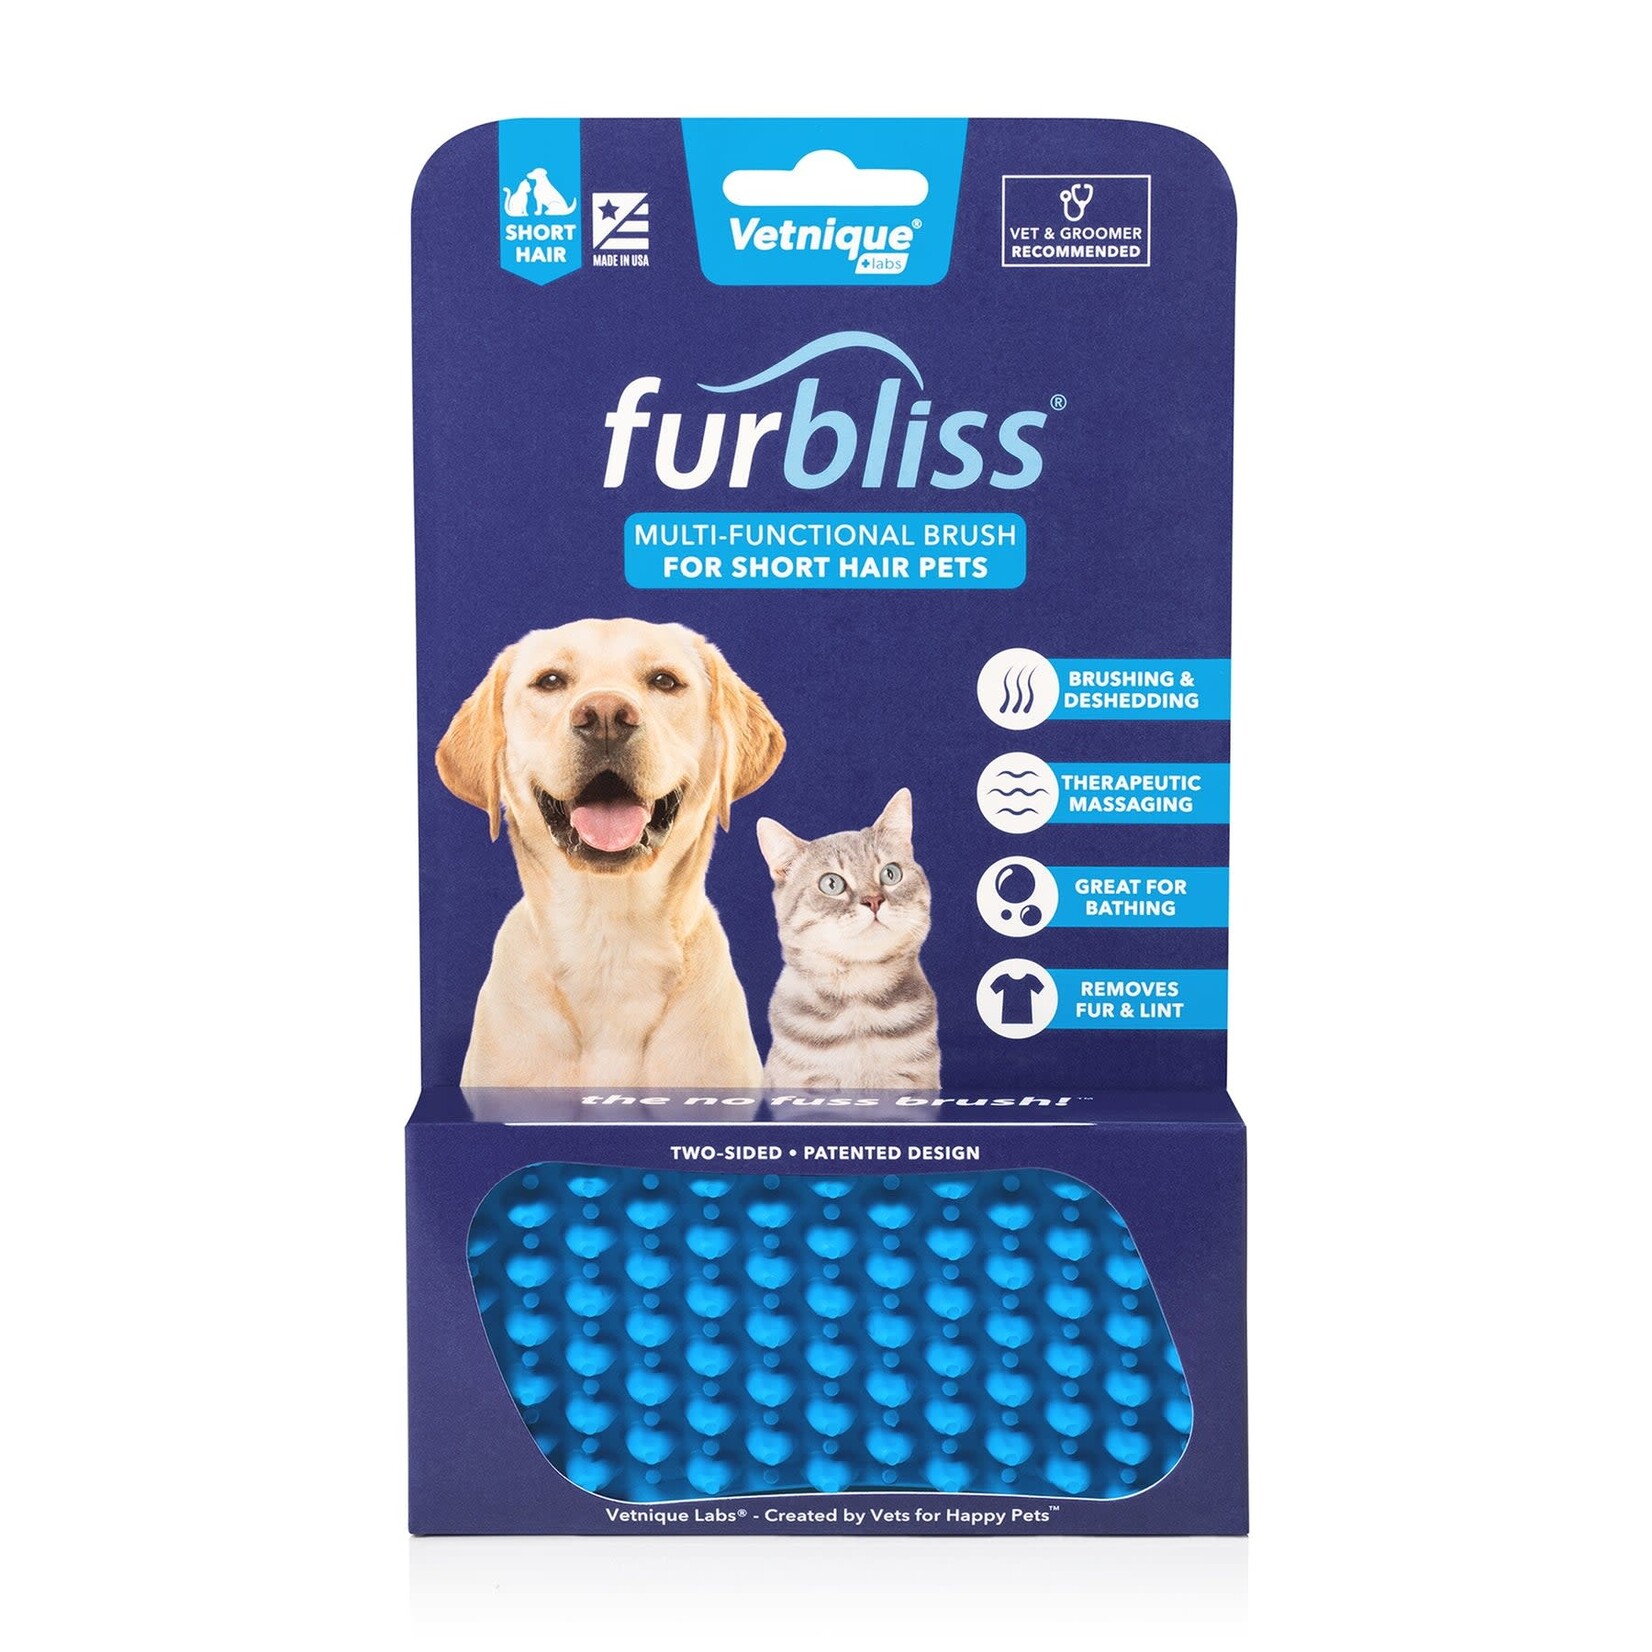 Furbliss Brush for Pets with Short Hair